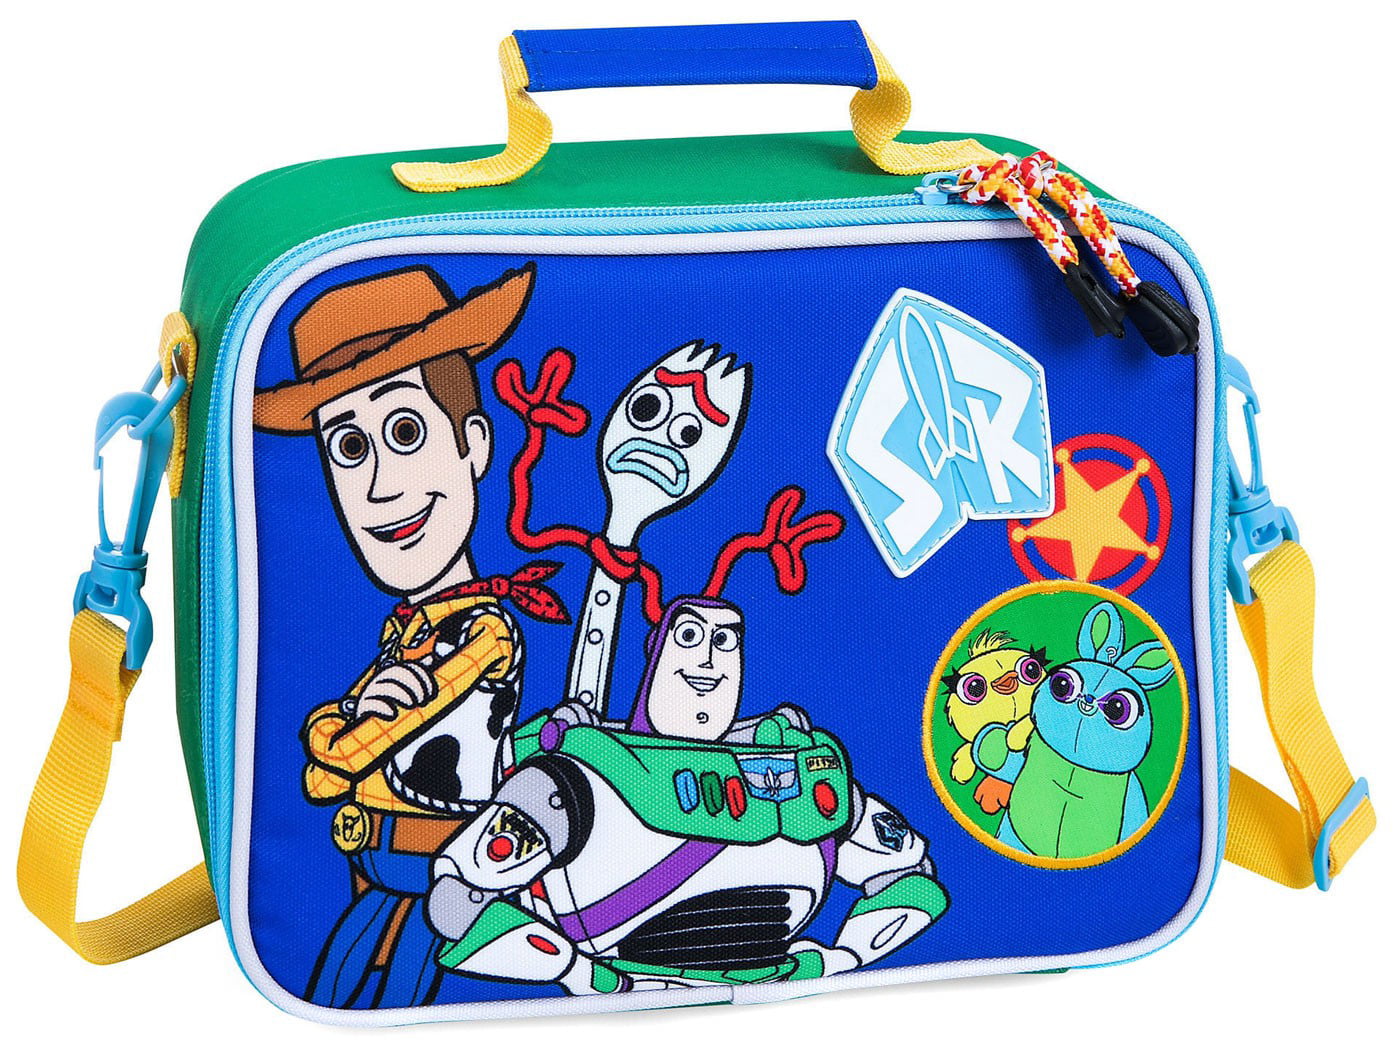 Toy Story 4 Tote Lunch Bag Kids Boys Girls School Picnic Insulated Lunchbox Gift 